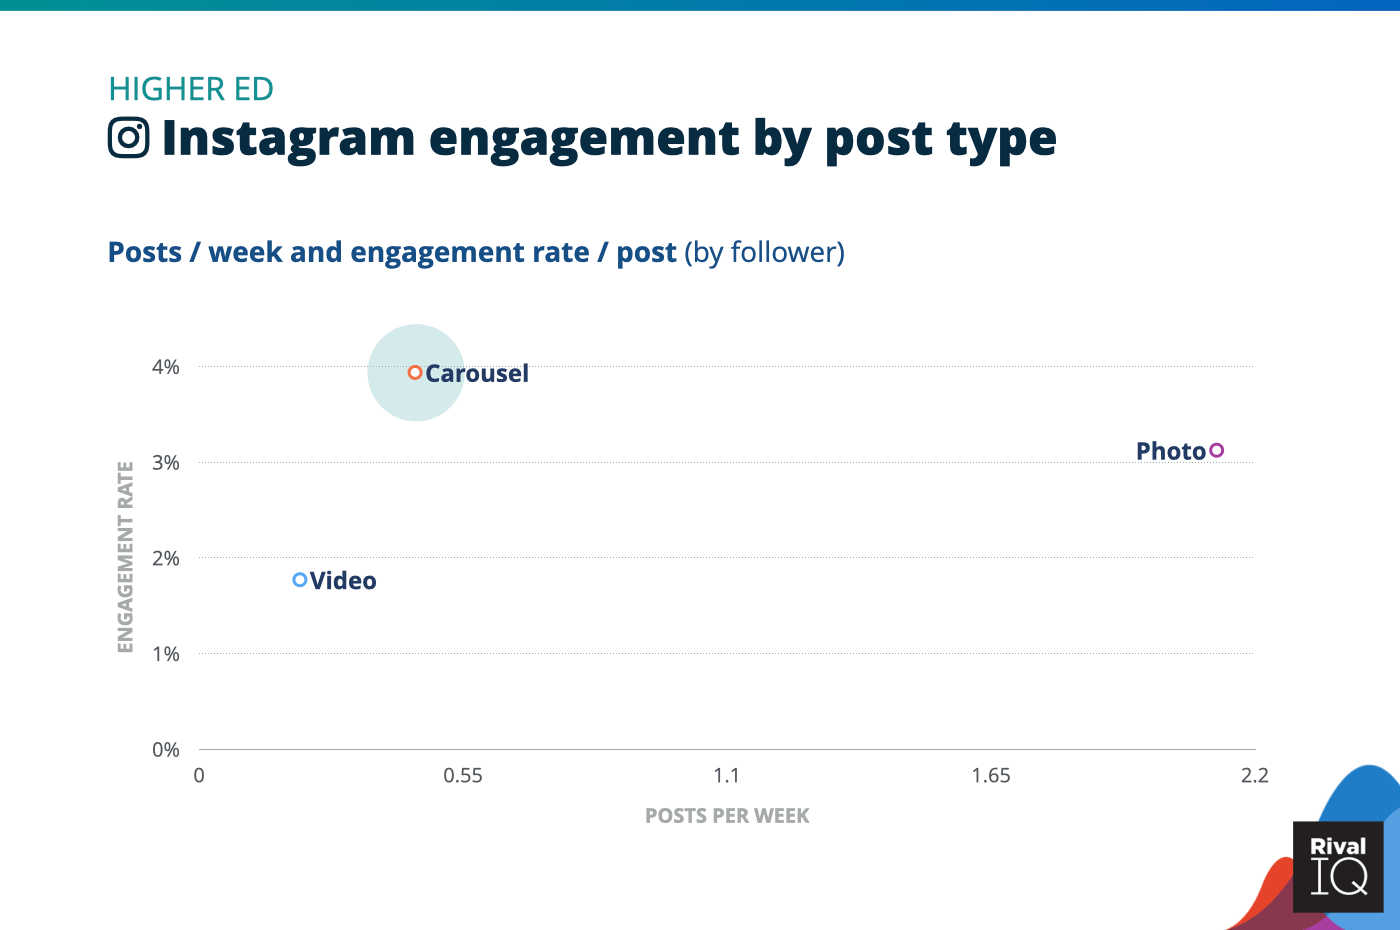 Chart of Instagram posts per week and engagement rate by post type, Higher Ed